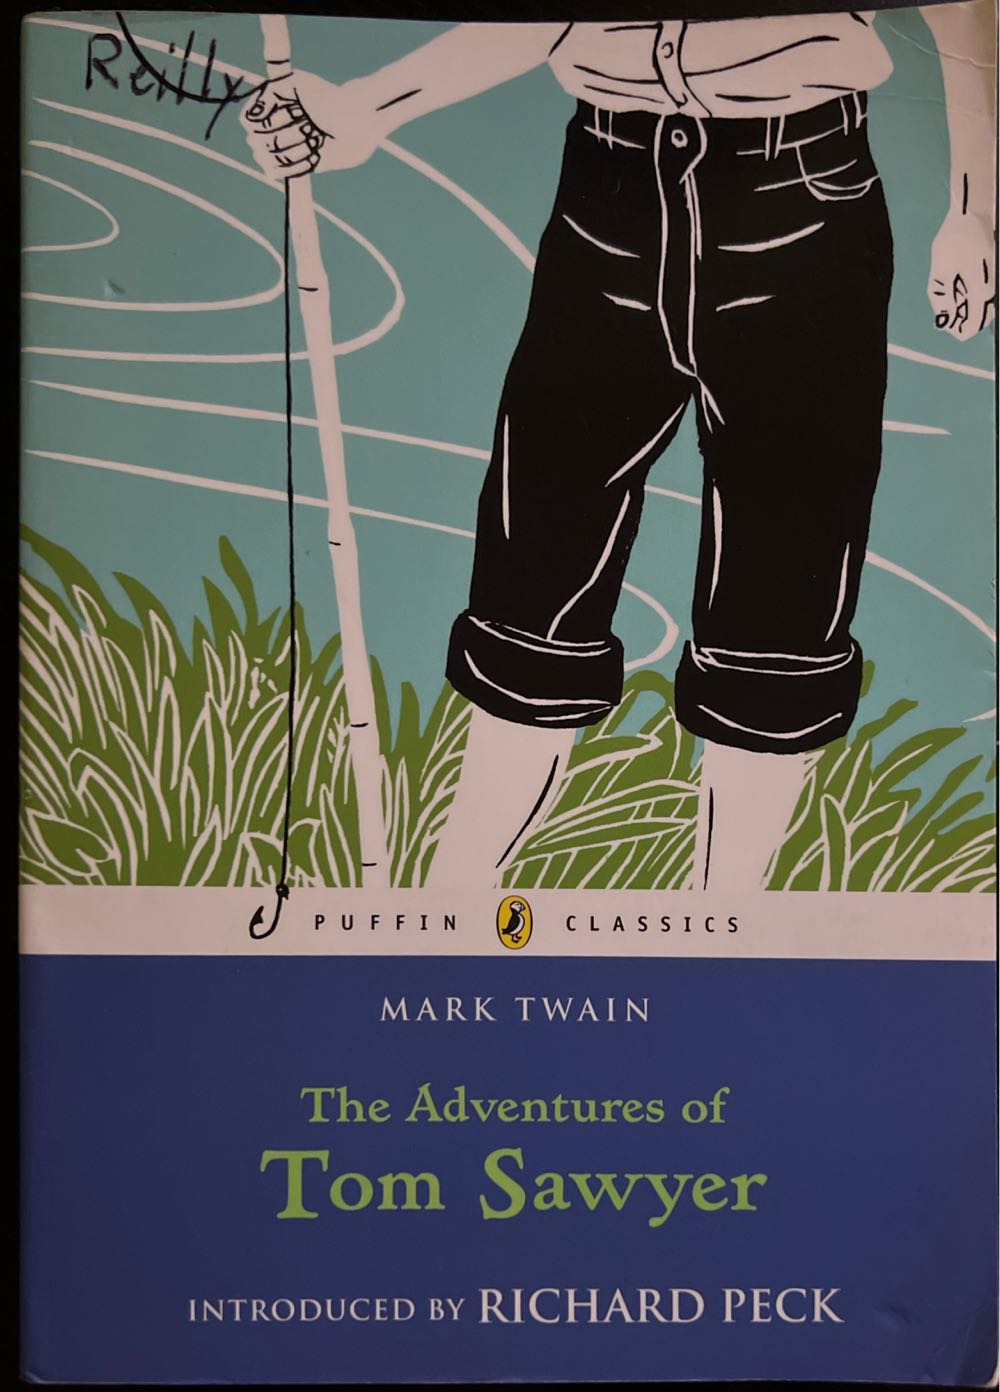 Adventures of Tom Sawyer, The - Mark Twain (Puffin Classics - Paperback) book collectible [Barcode 9780141321103] - Main Image 3